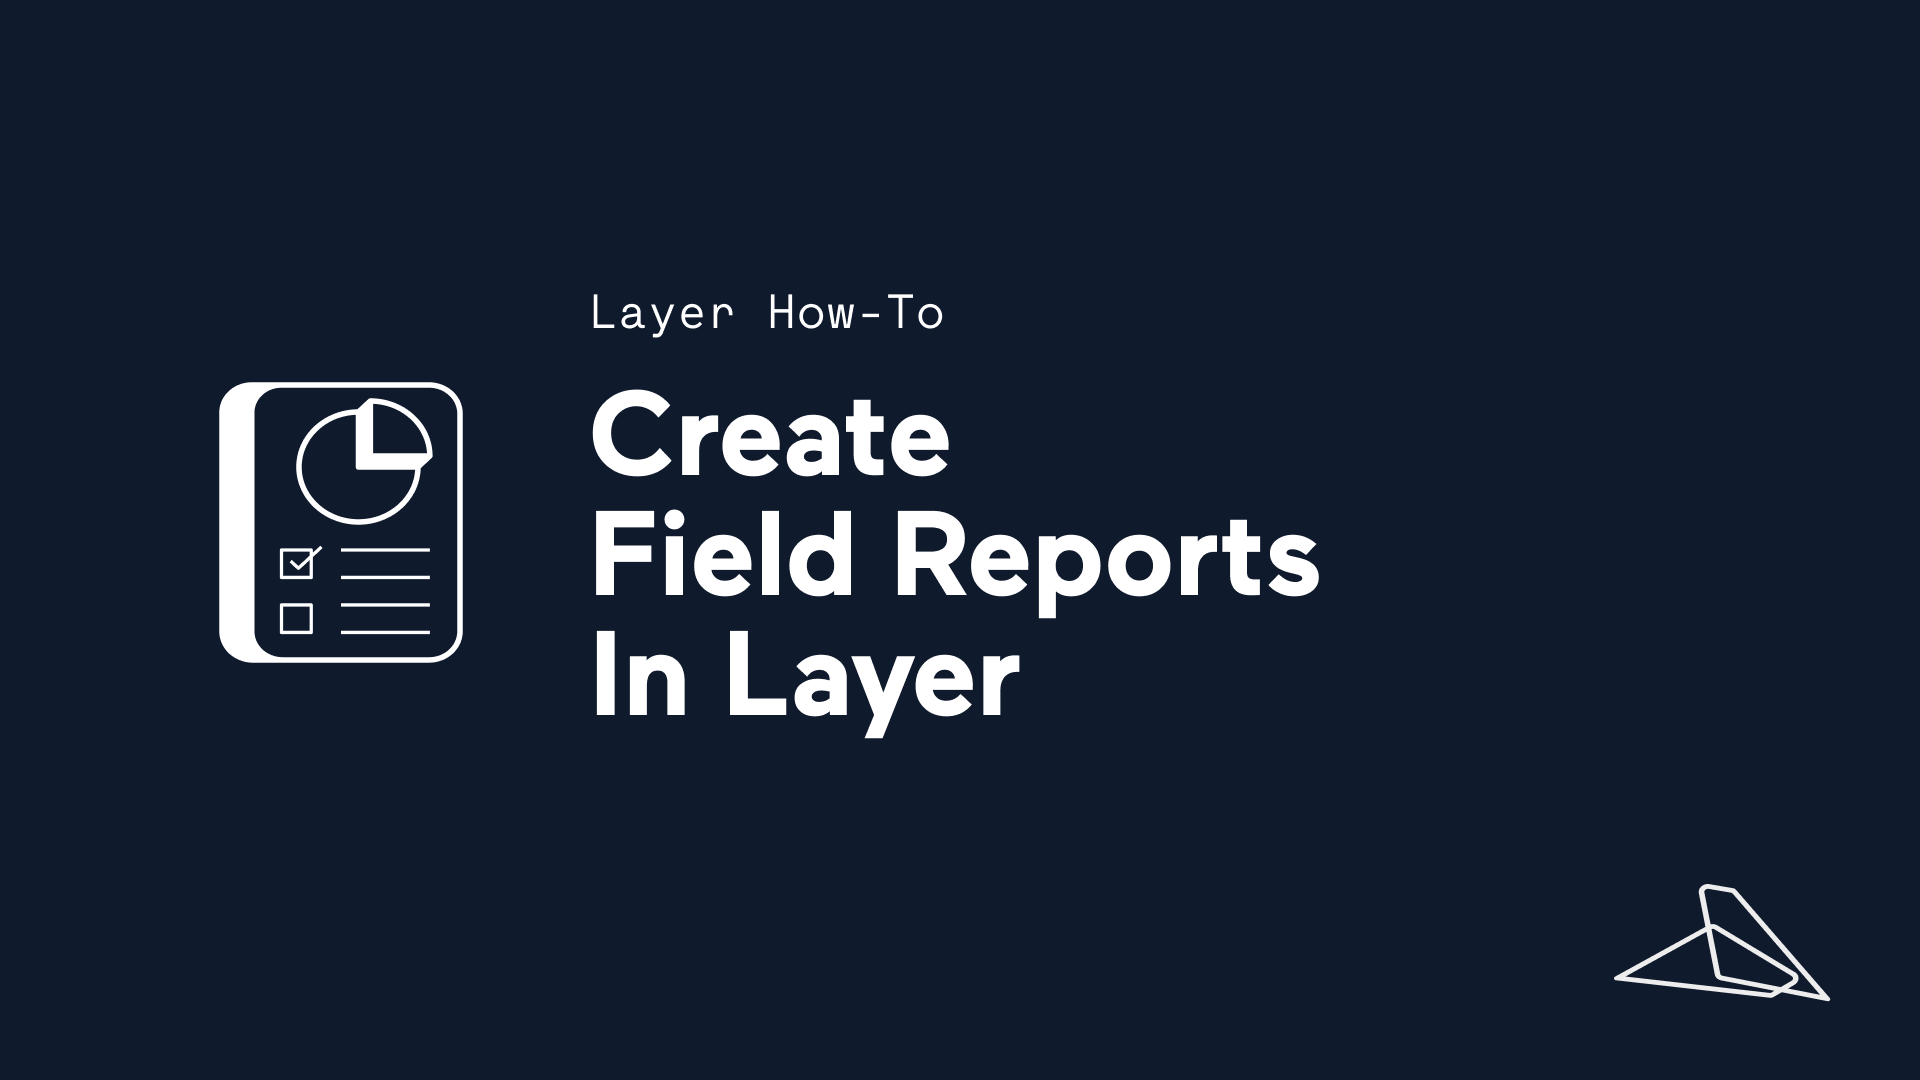 How to create field reports in Layer